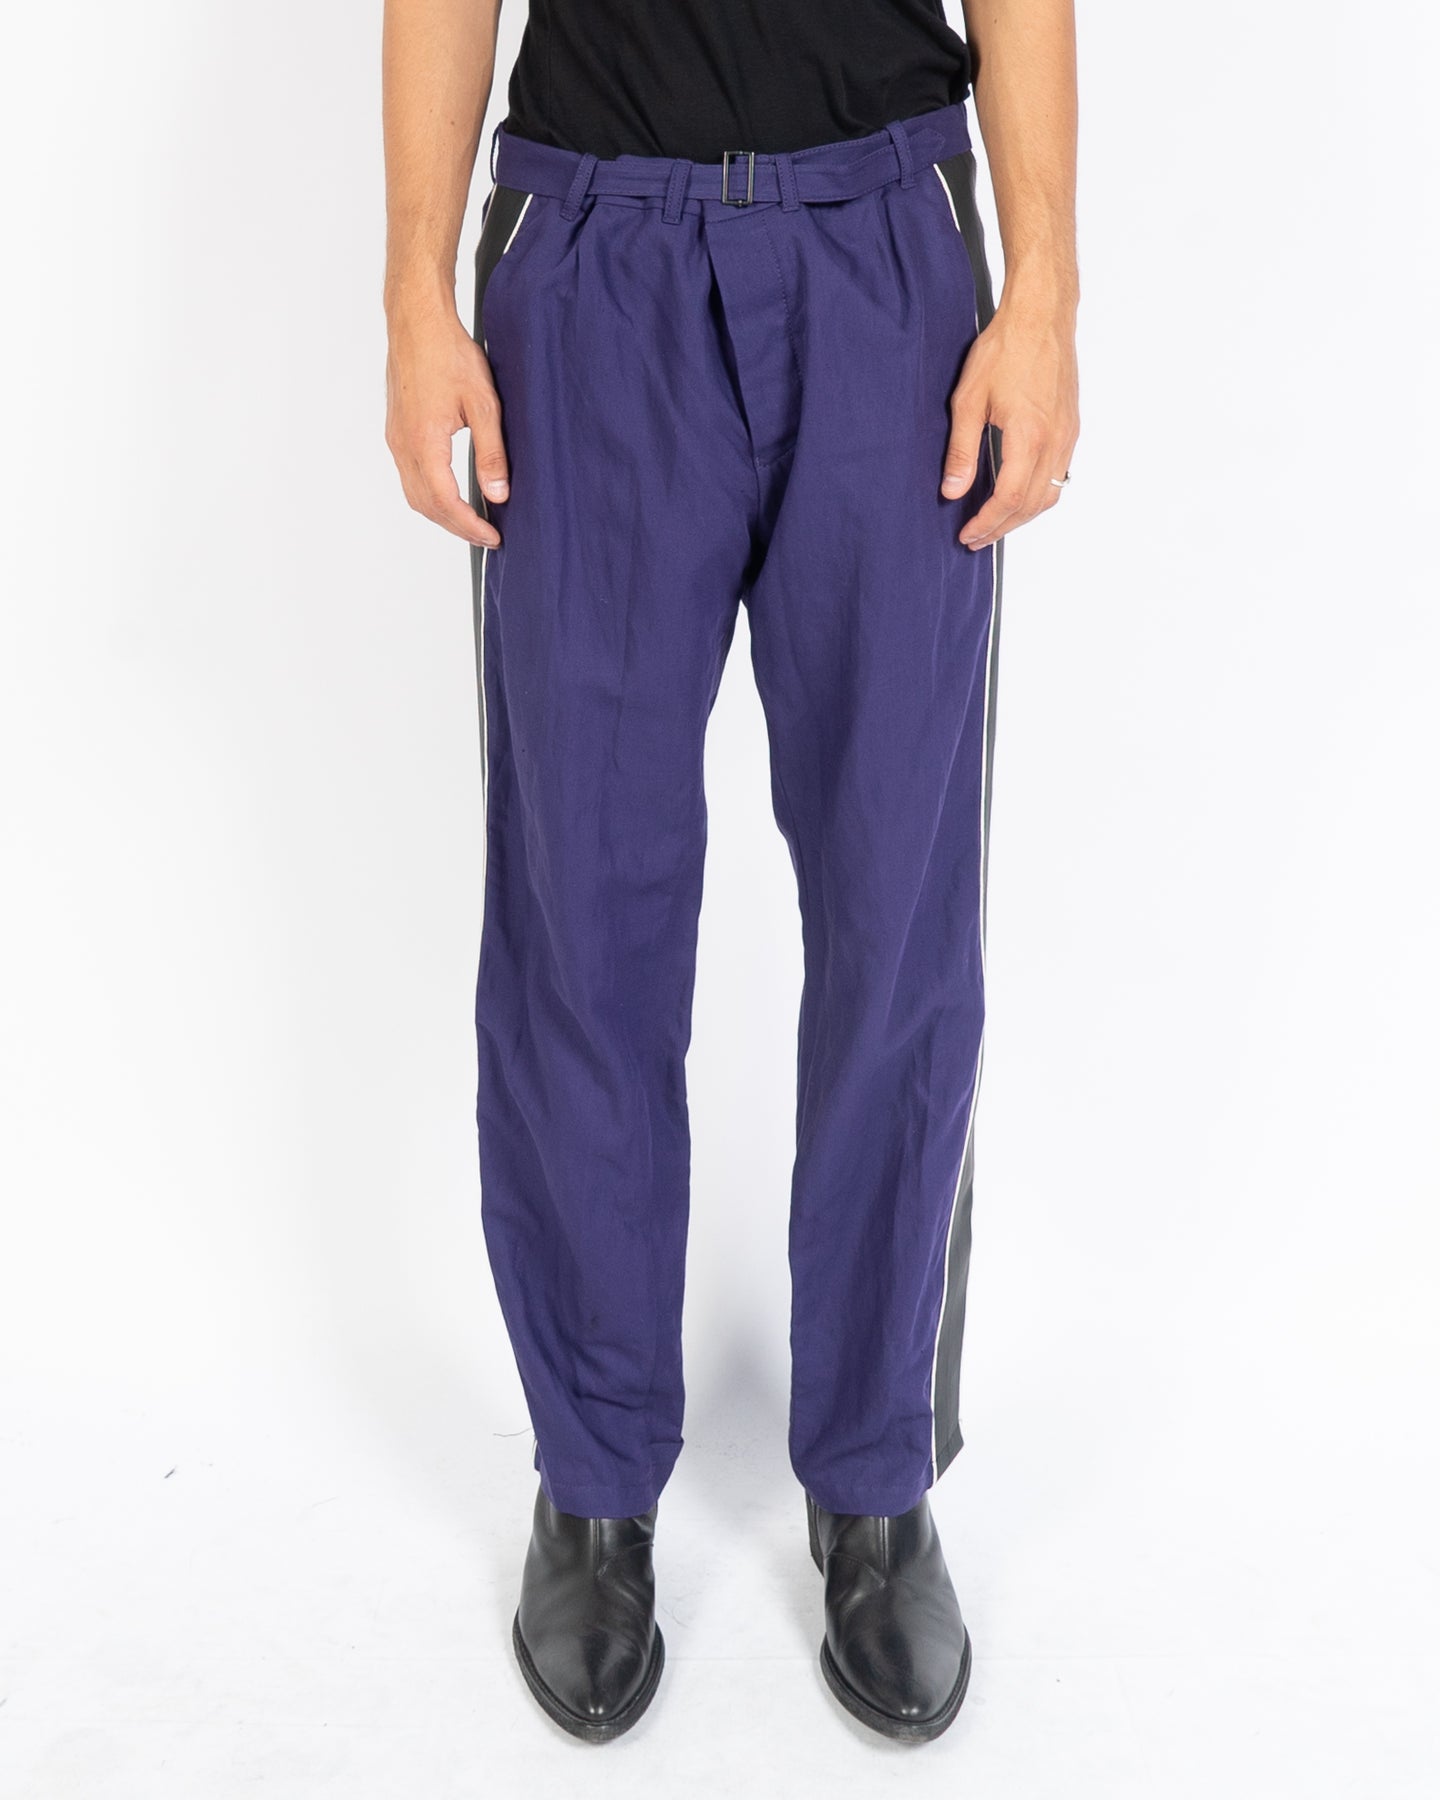 SS18 Striped Violet Belt Trousers 1 of 1 Sample